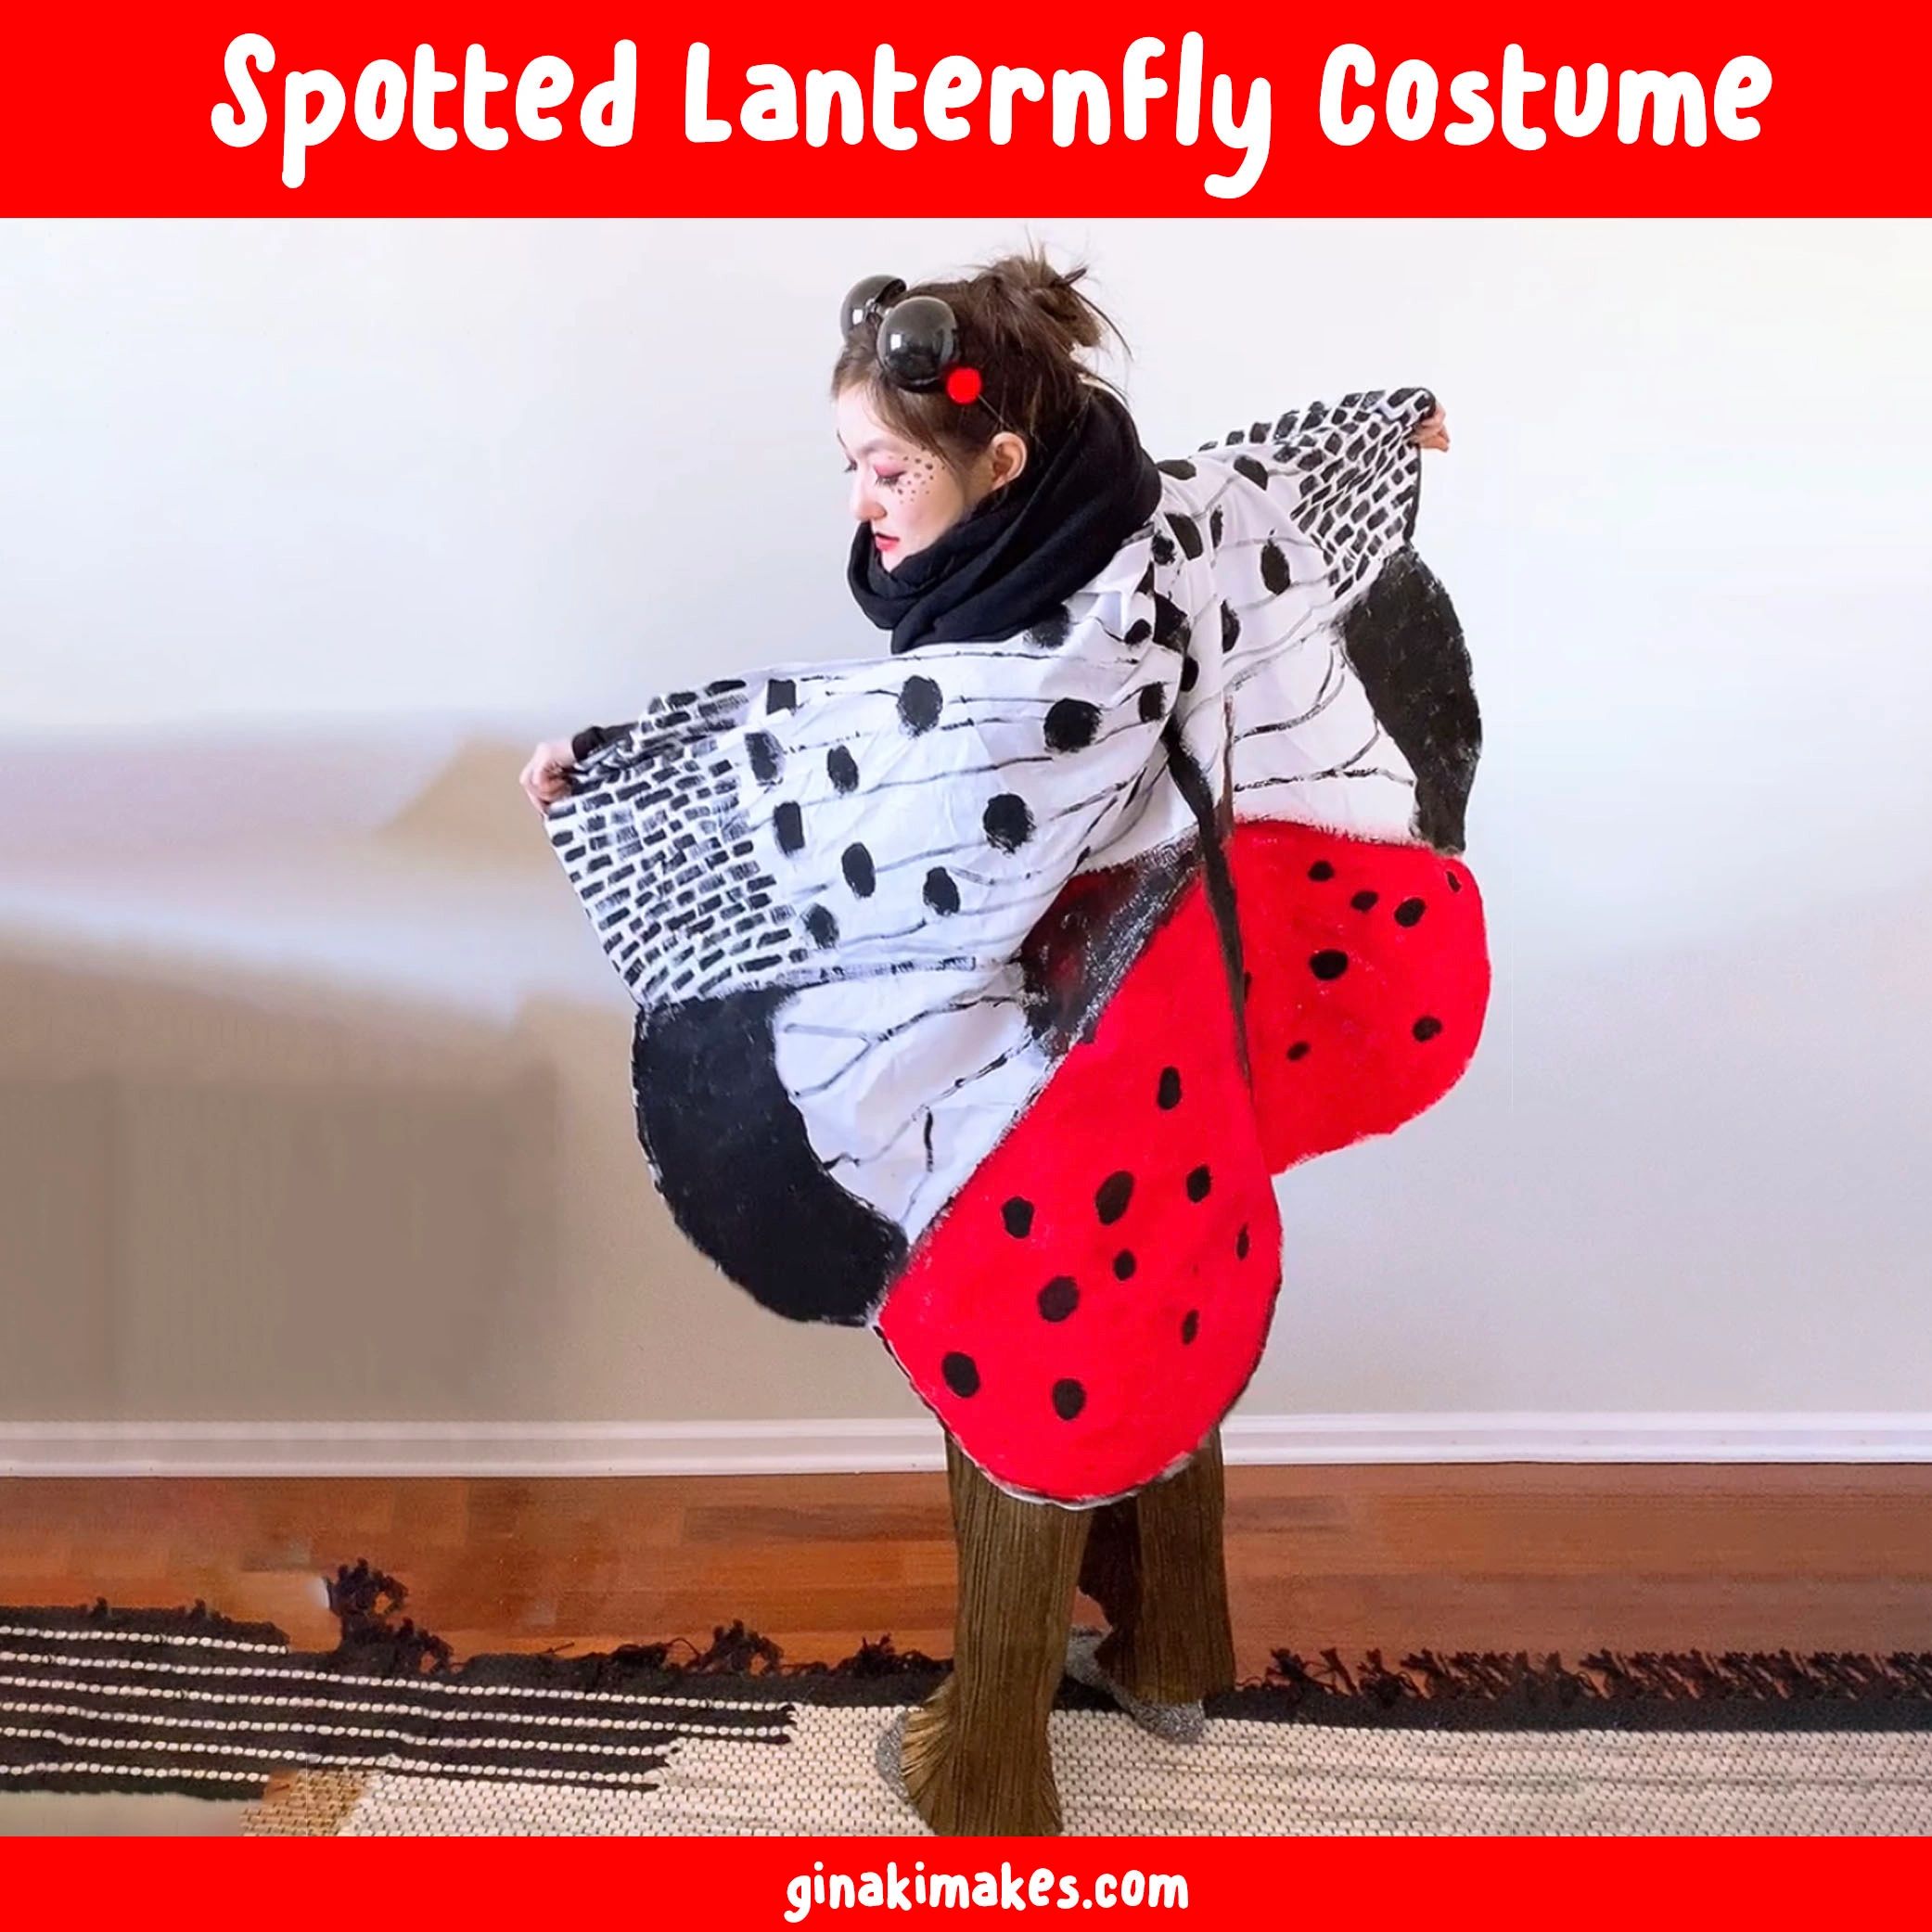 Spotted Lanternfly Costume